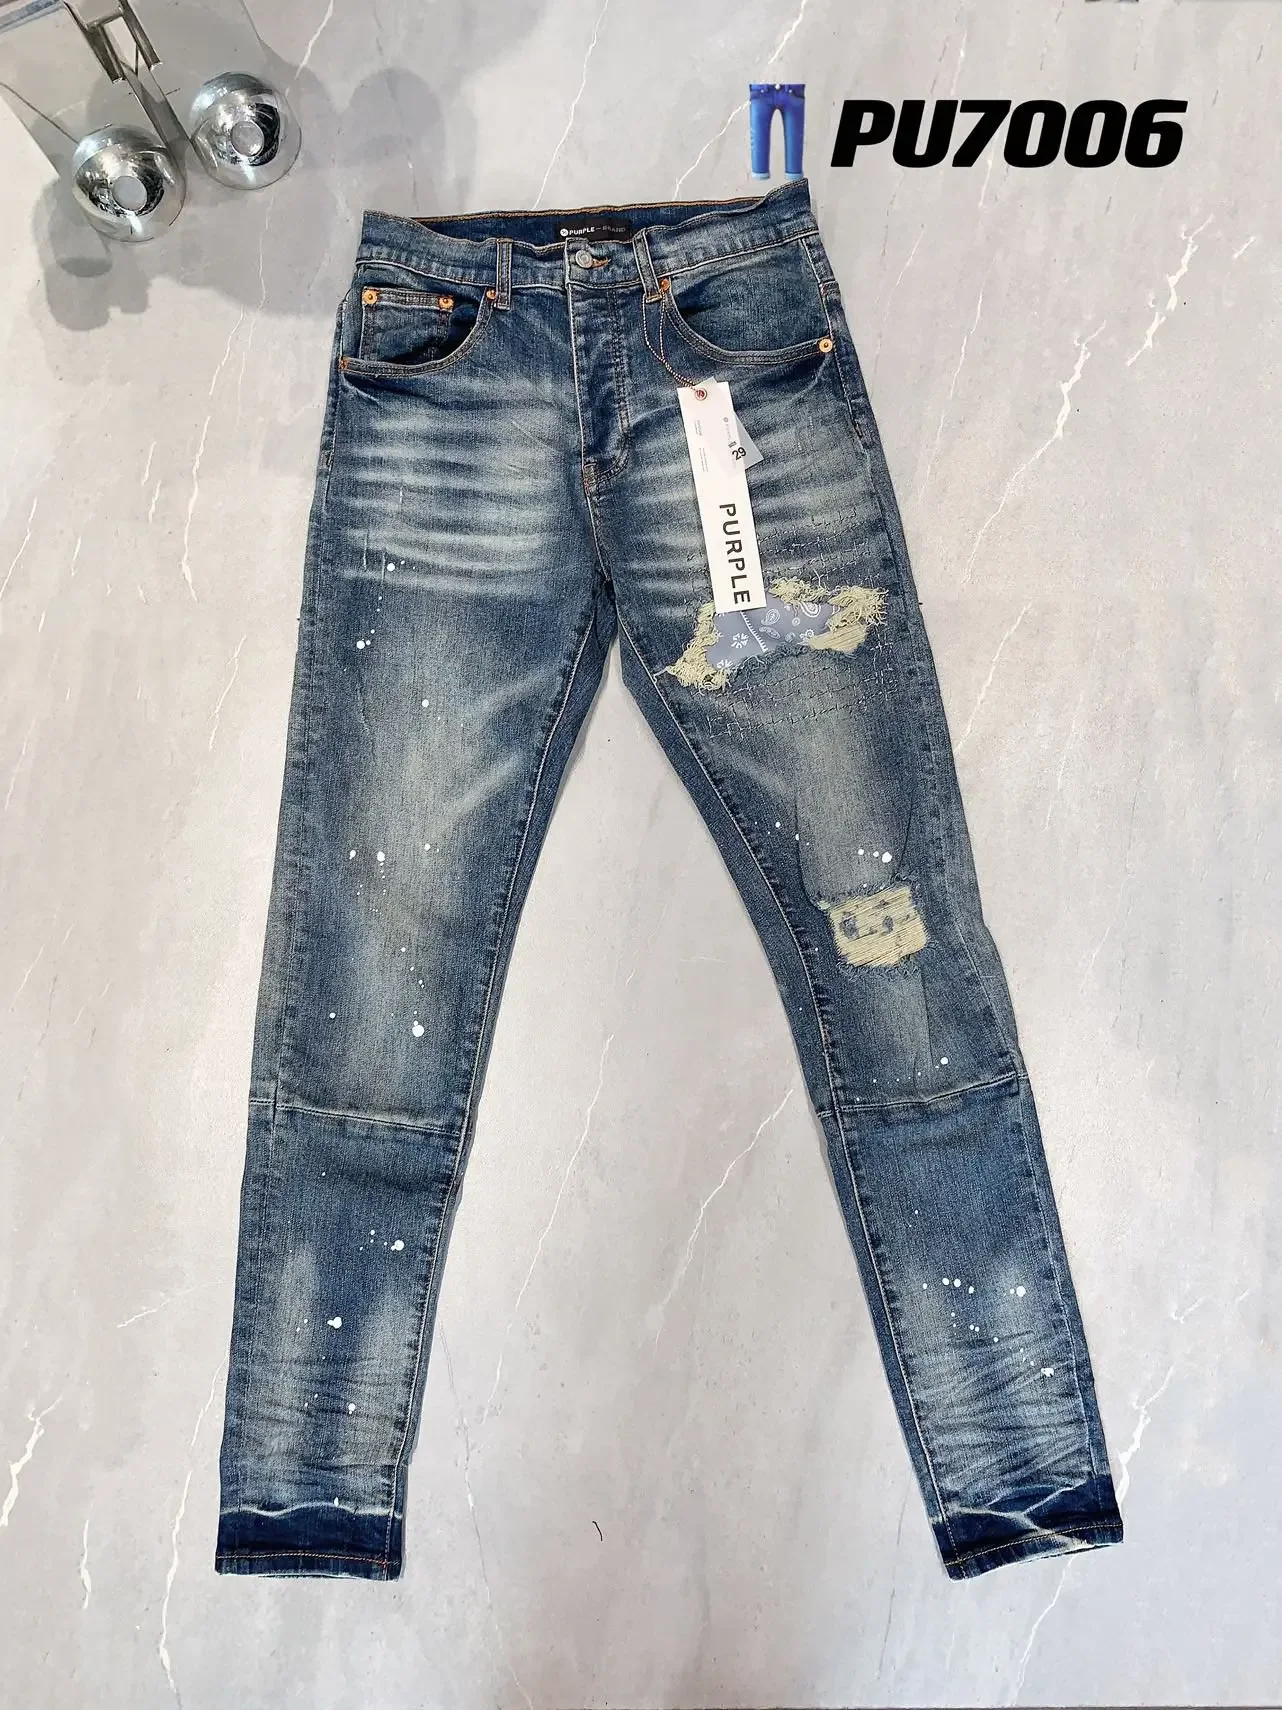 

Purple Brand Jean Men's Distressed Slim Fit Washed Destroyed Make Old Hole Ripped Blue Jeans Denim Pants Trousers